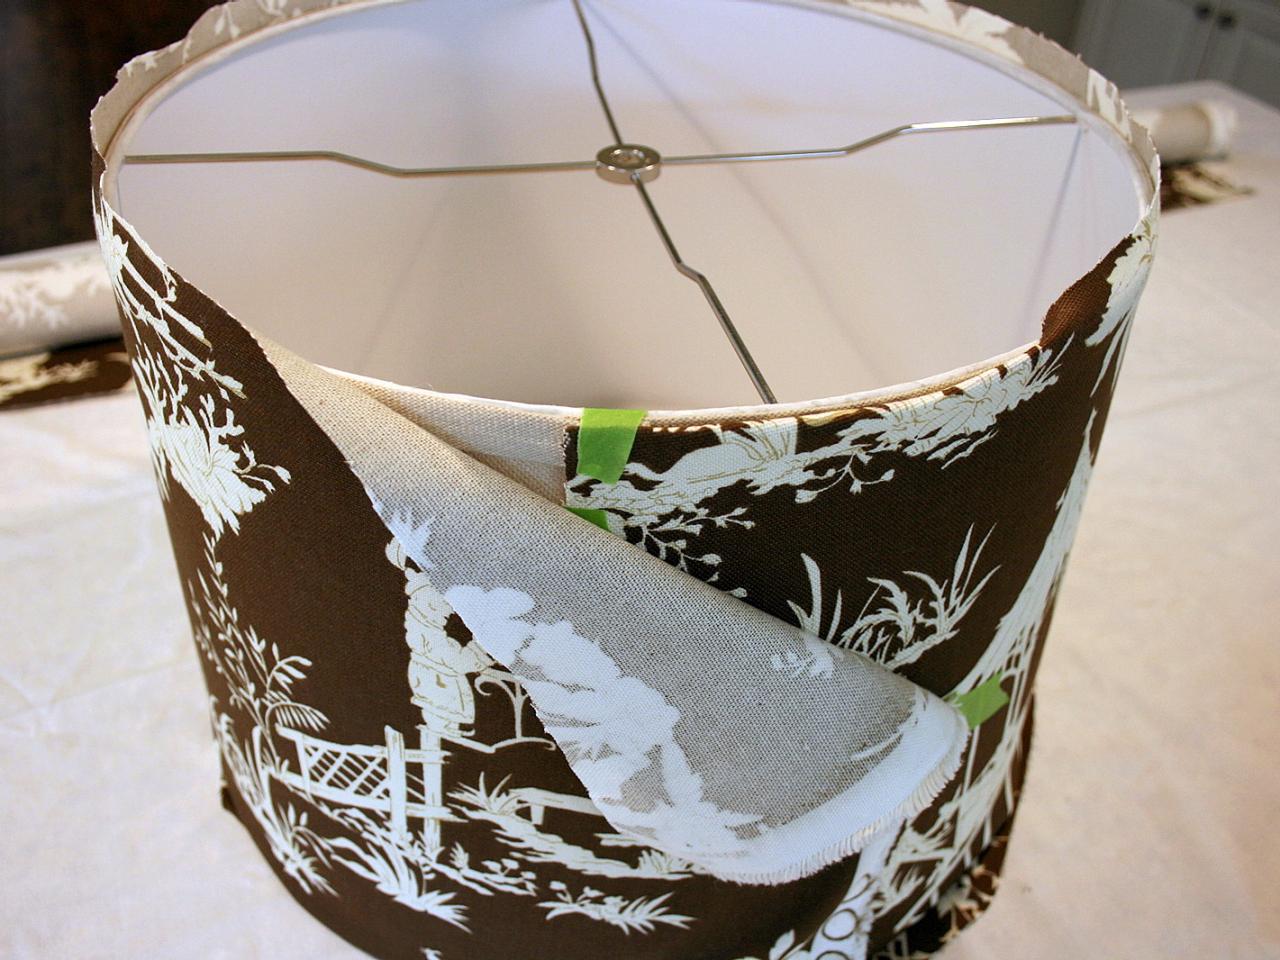 Custom Fabric Covered Lampshade, How Do You Cover A Lampshade With Material